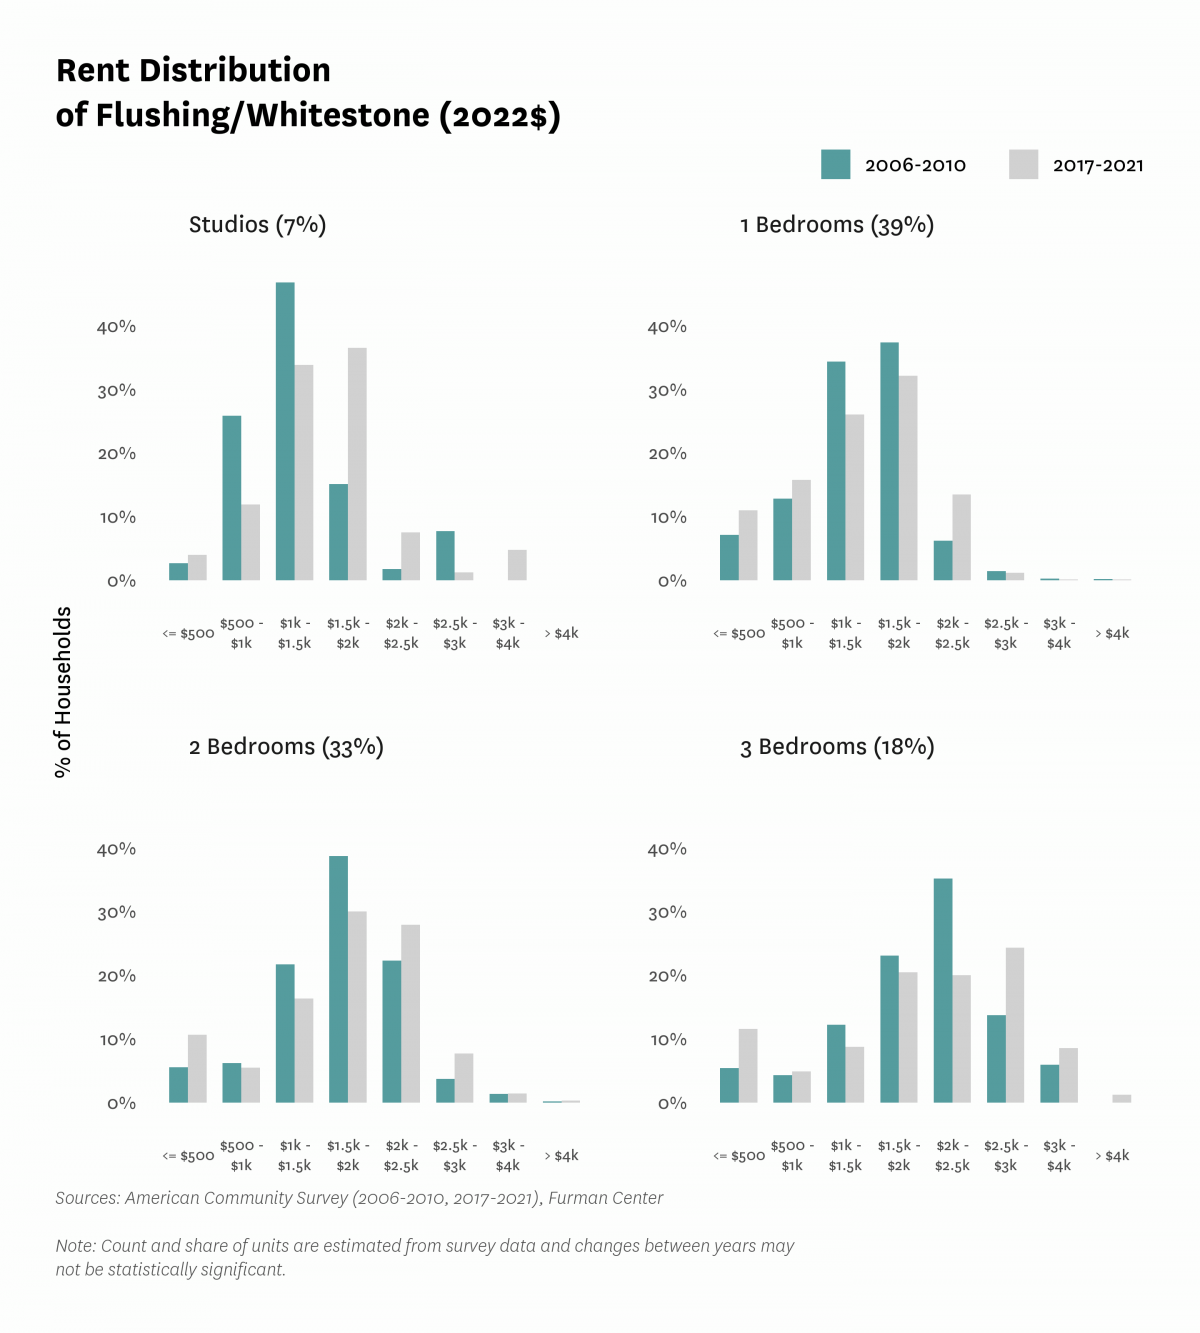 Graph showing the distribution of rents in Flushing/Whitestone in both 2010 and 2017-2021.